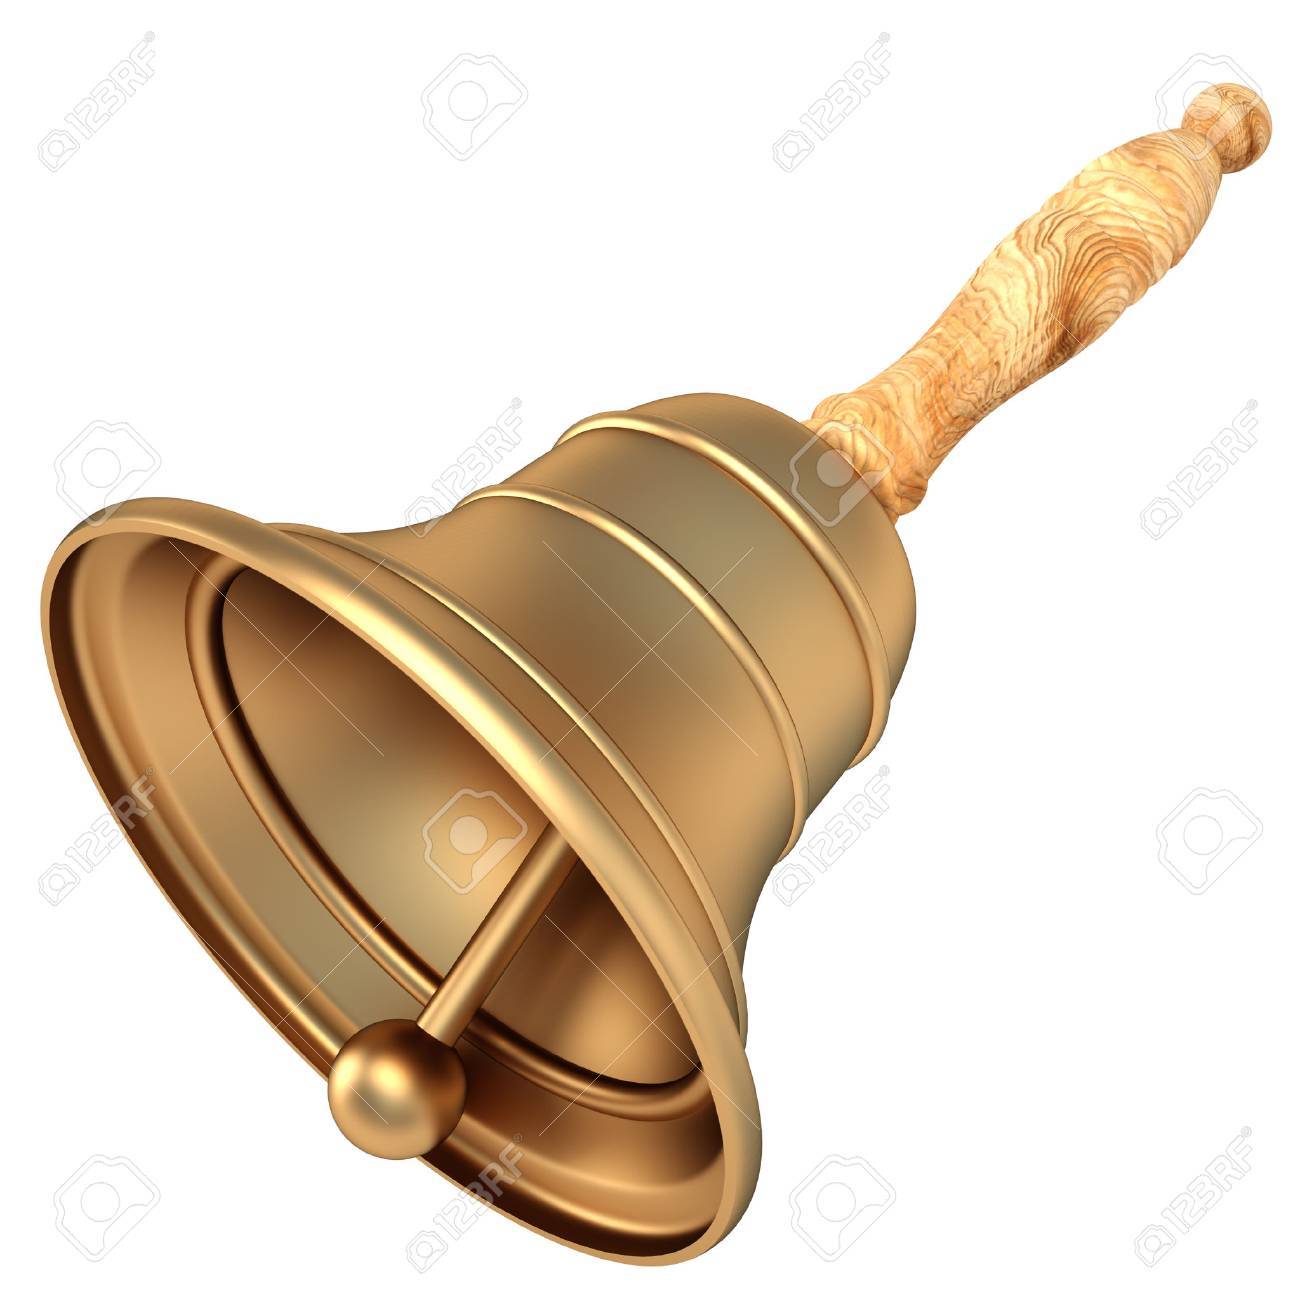 Vintage School Bell Isolated On White Background 3d Stock Photo